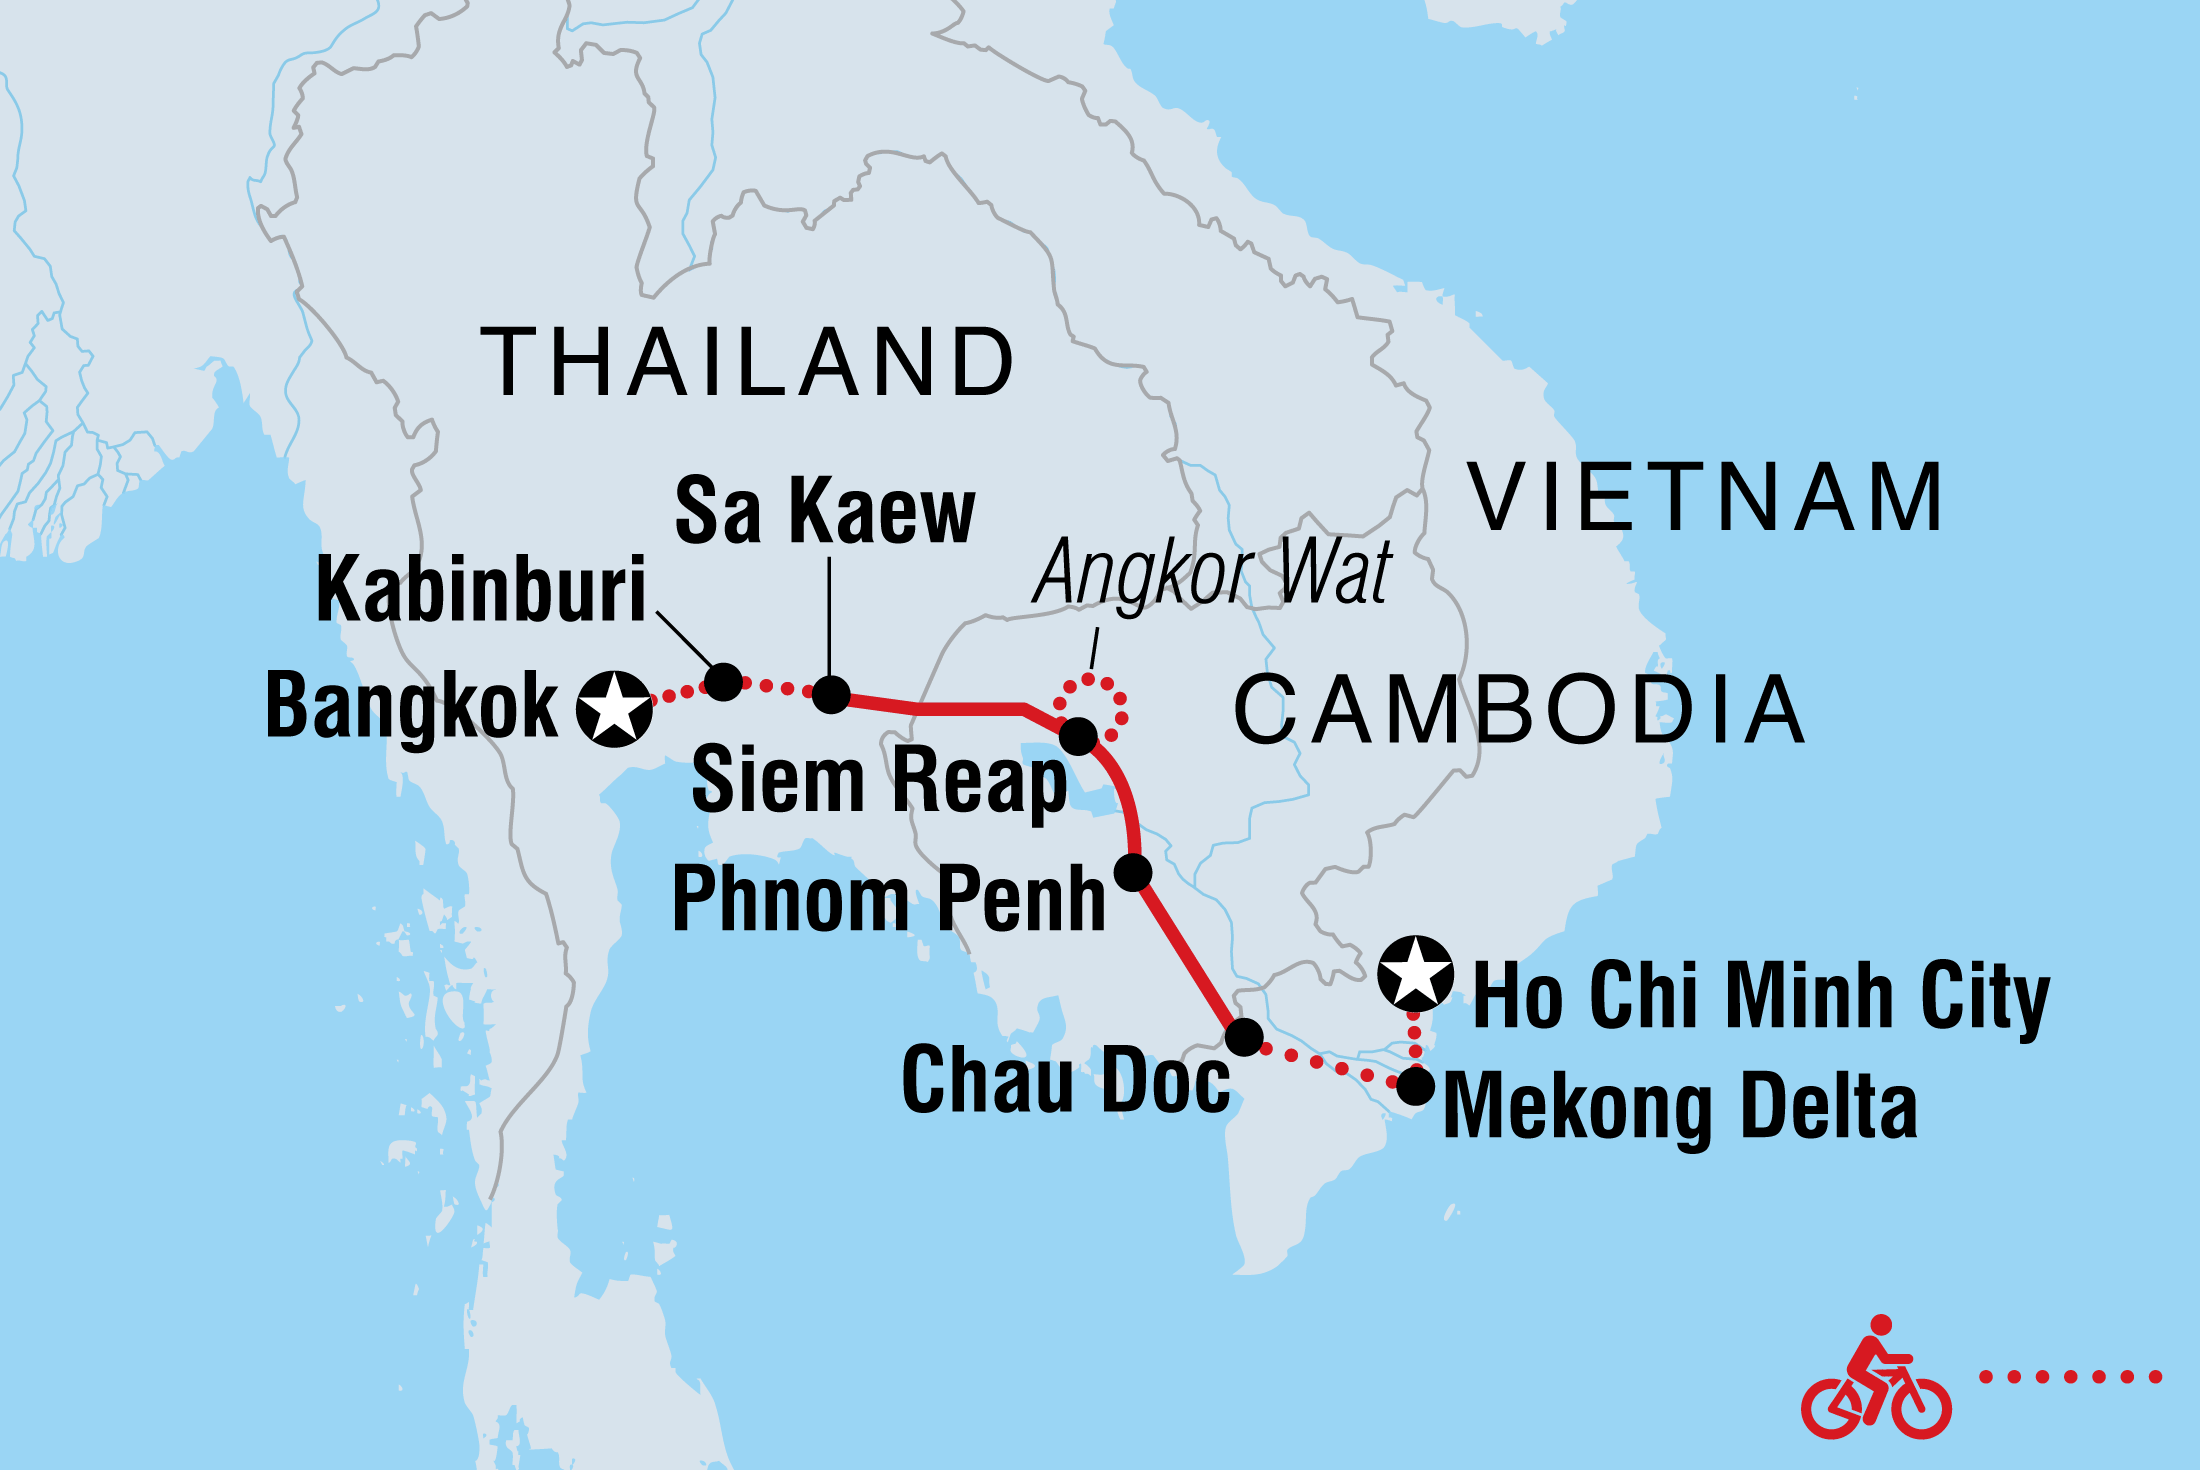 Map of Cycle Vietnam, Cambodia & Thailand including Cambodia, Thailand and Vietnam